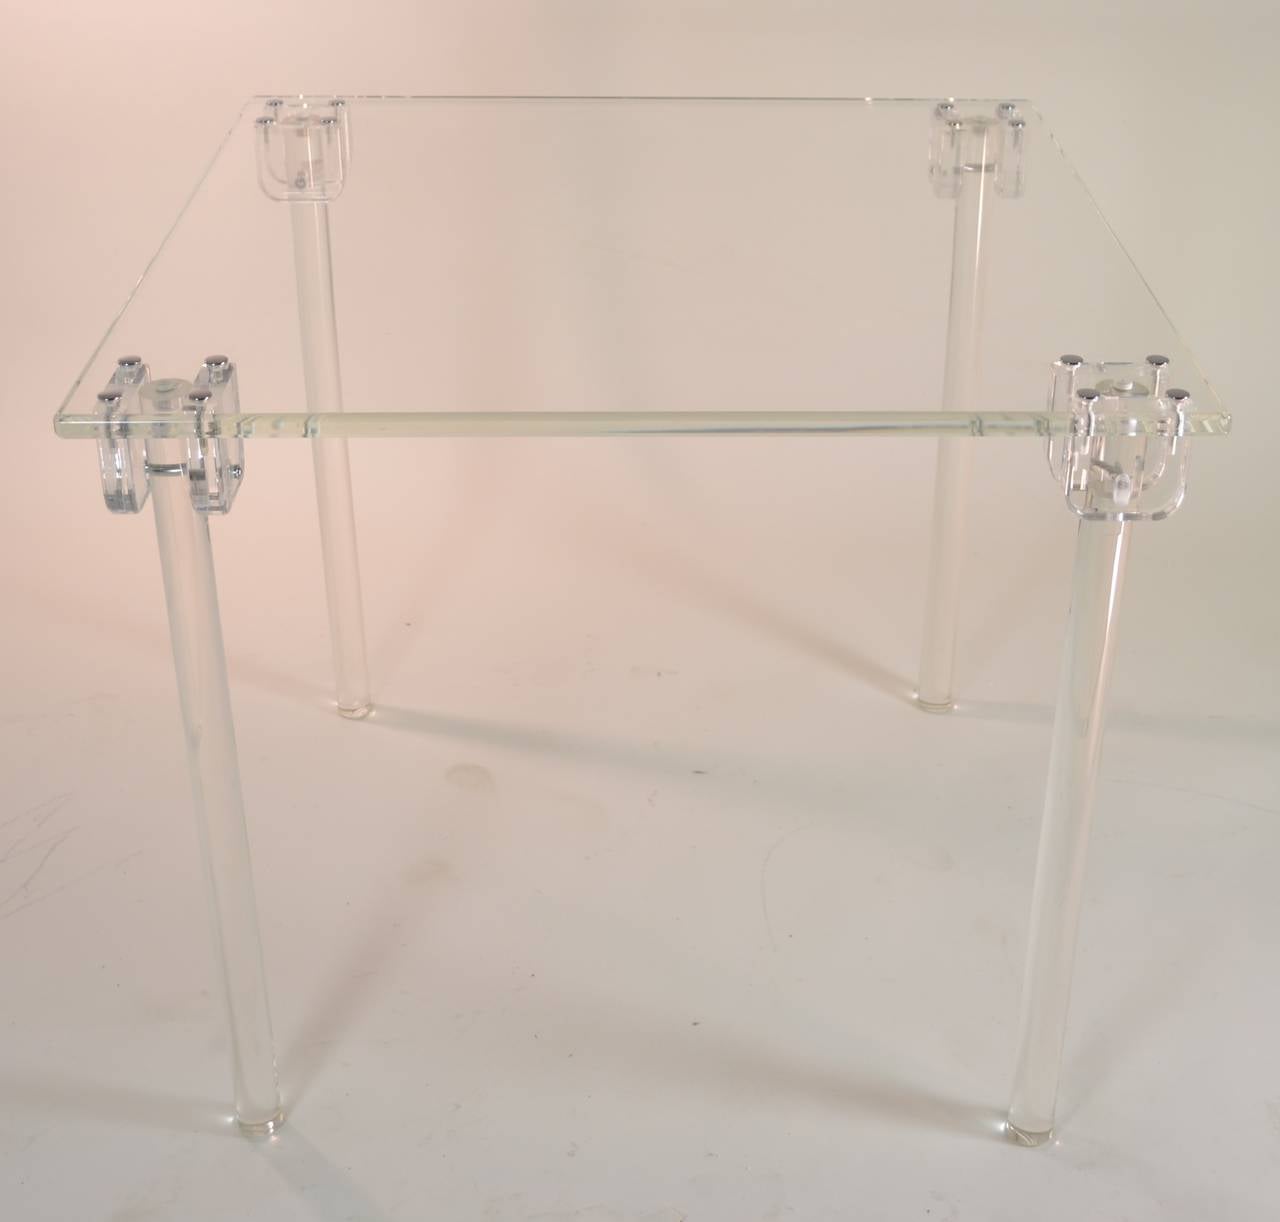 Wonderfully crafted Lucite folding card table. Cylindrical legs that fold neatly along the edges of the table --then fold down and snap solidly into place pegged into the heavy Lucite tabletop. Excellent condition.